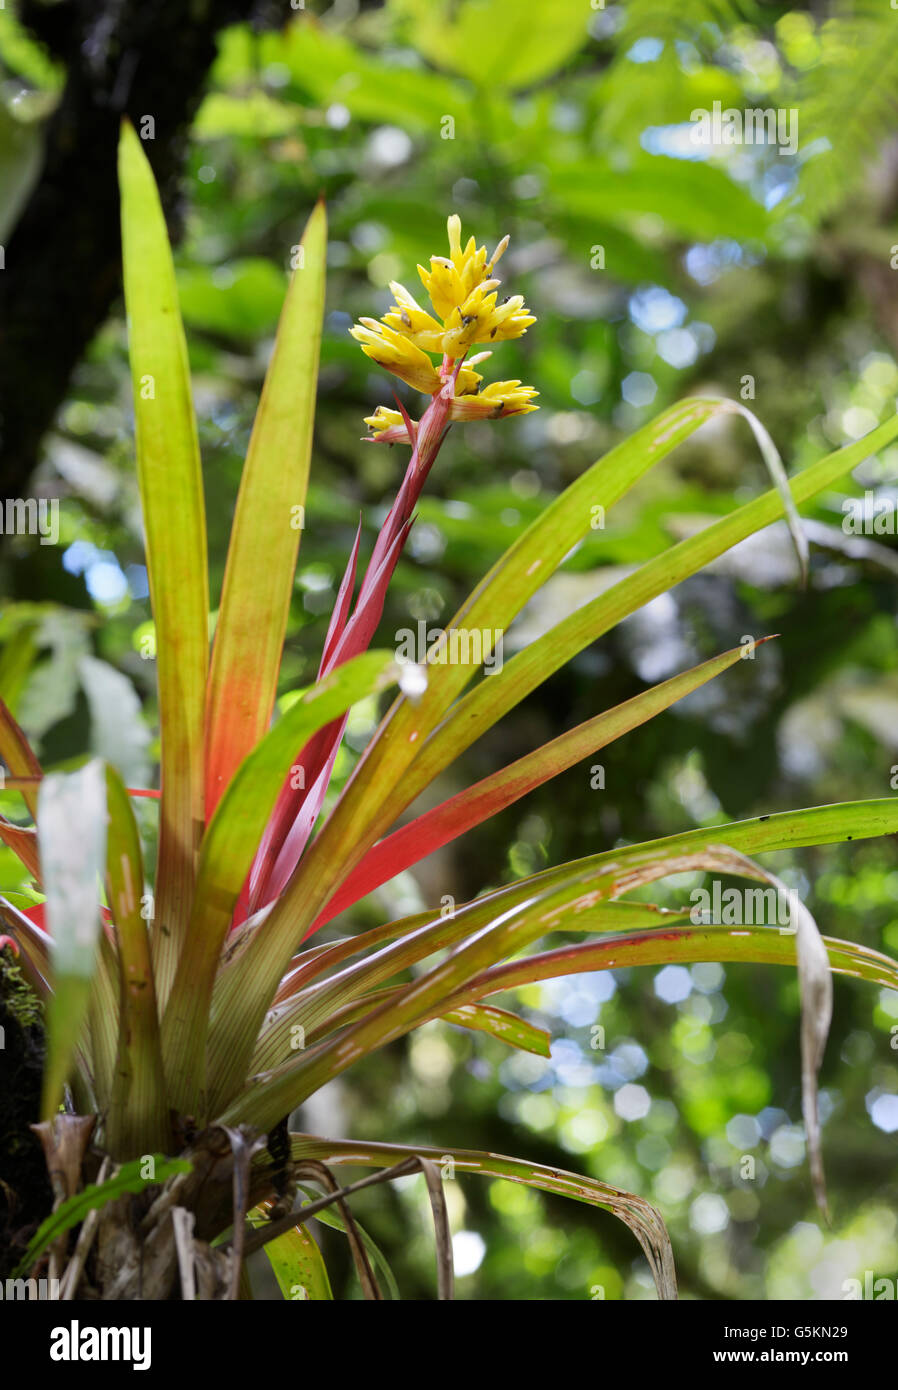 Tropical bromeliad flowering in rainforest, Costa Rica. See description for location details Stock Photo